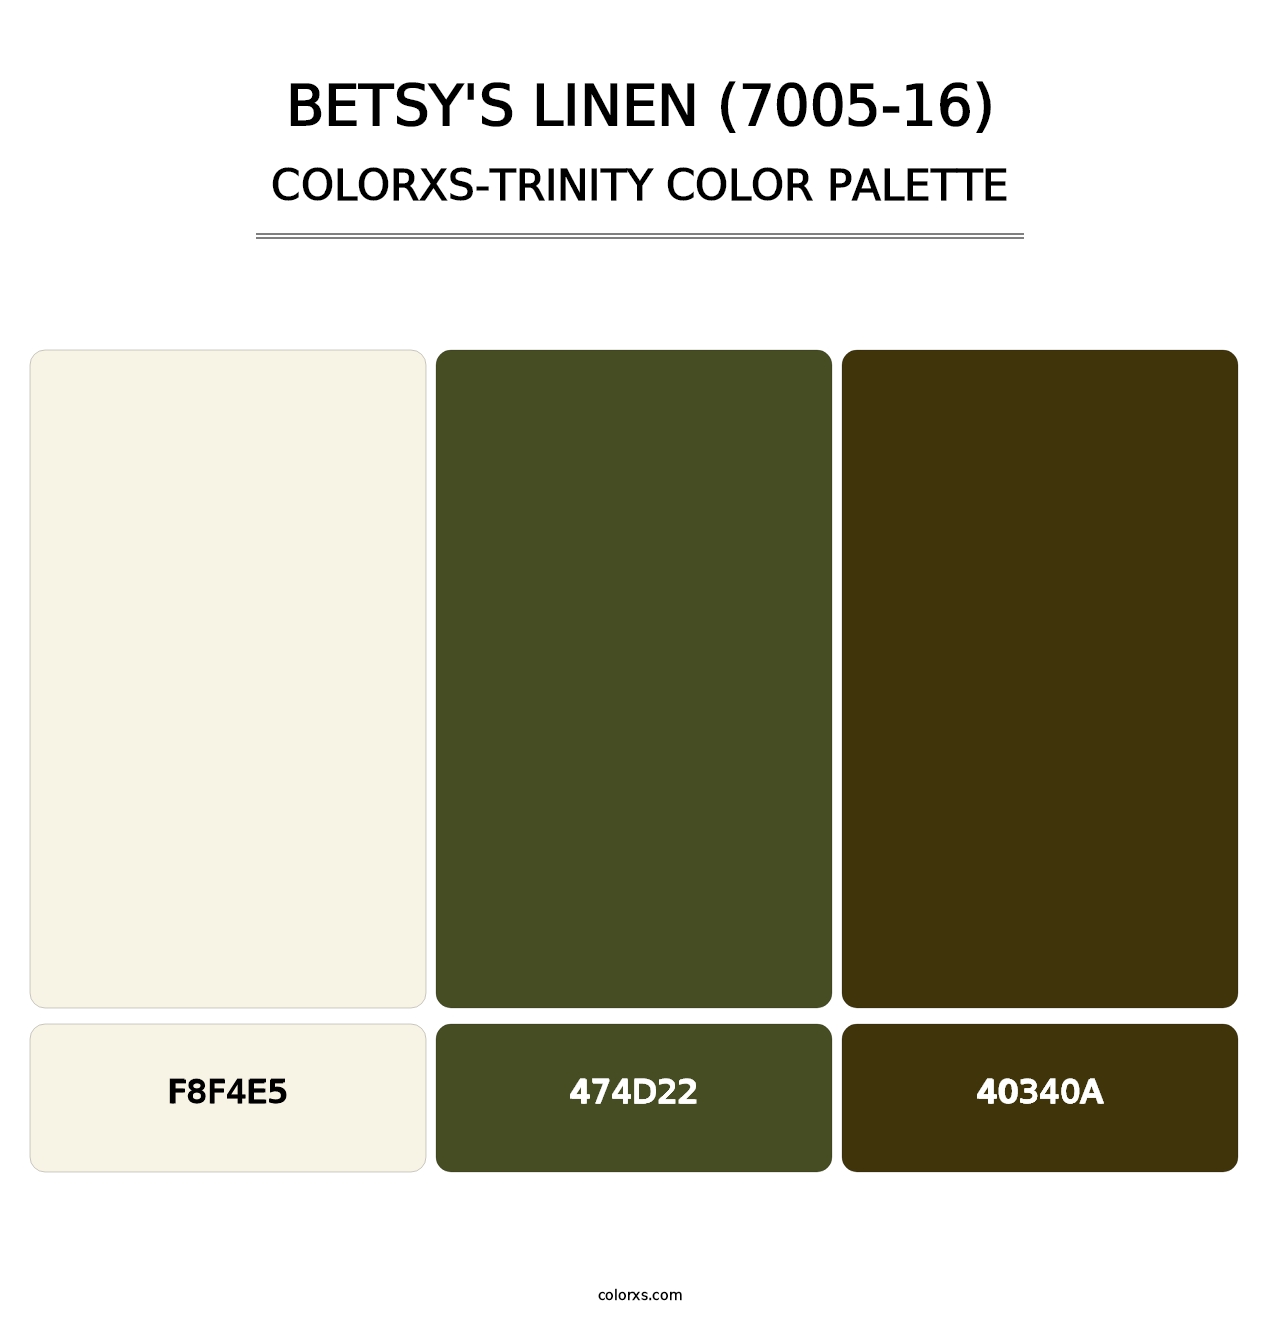 Betsy's Linen (7005-16) - Colorxs Trinity Palette